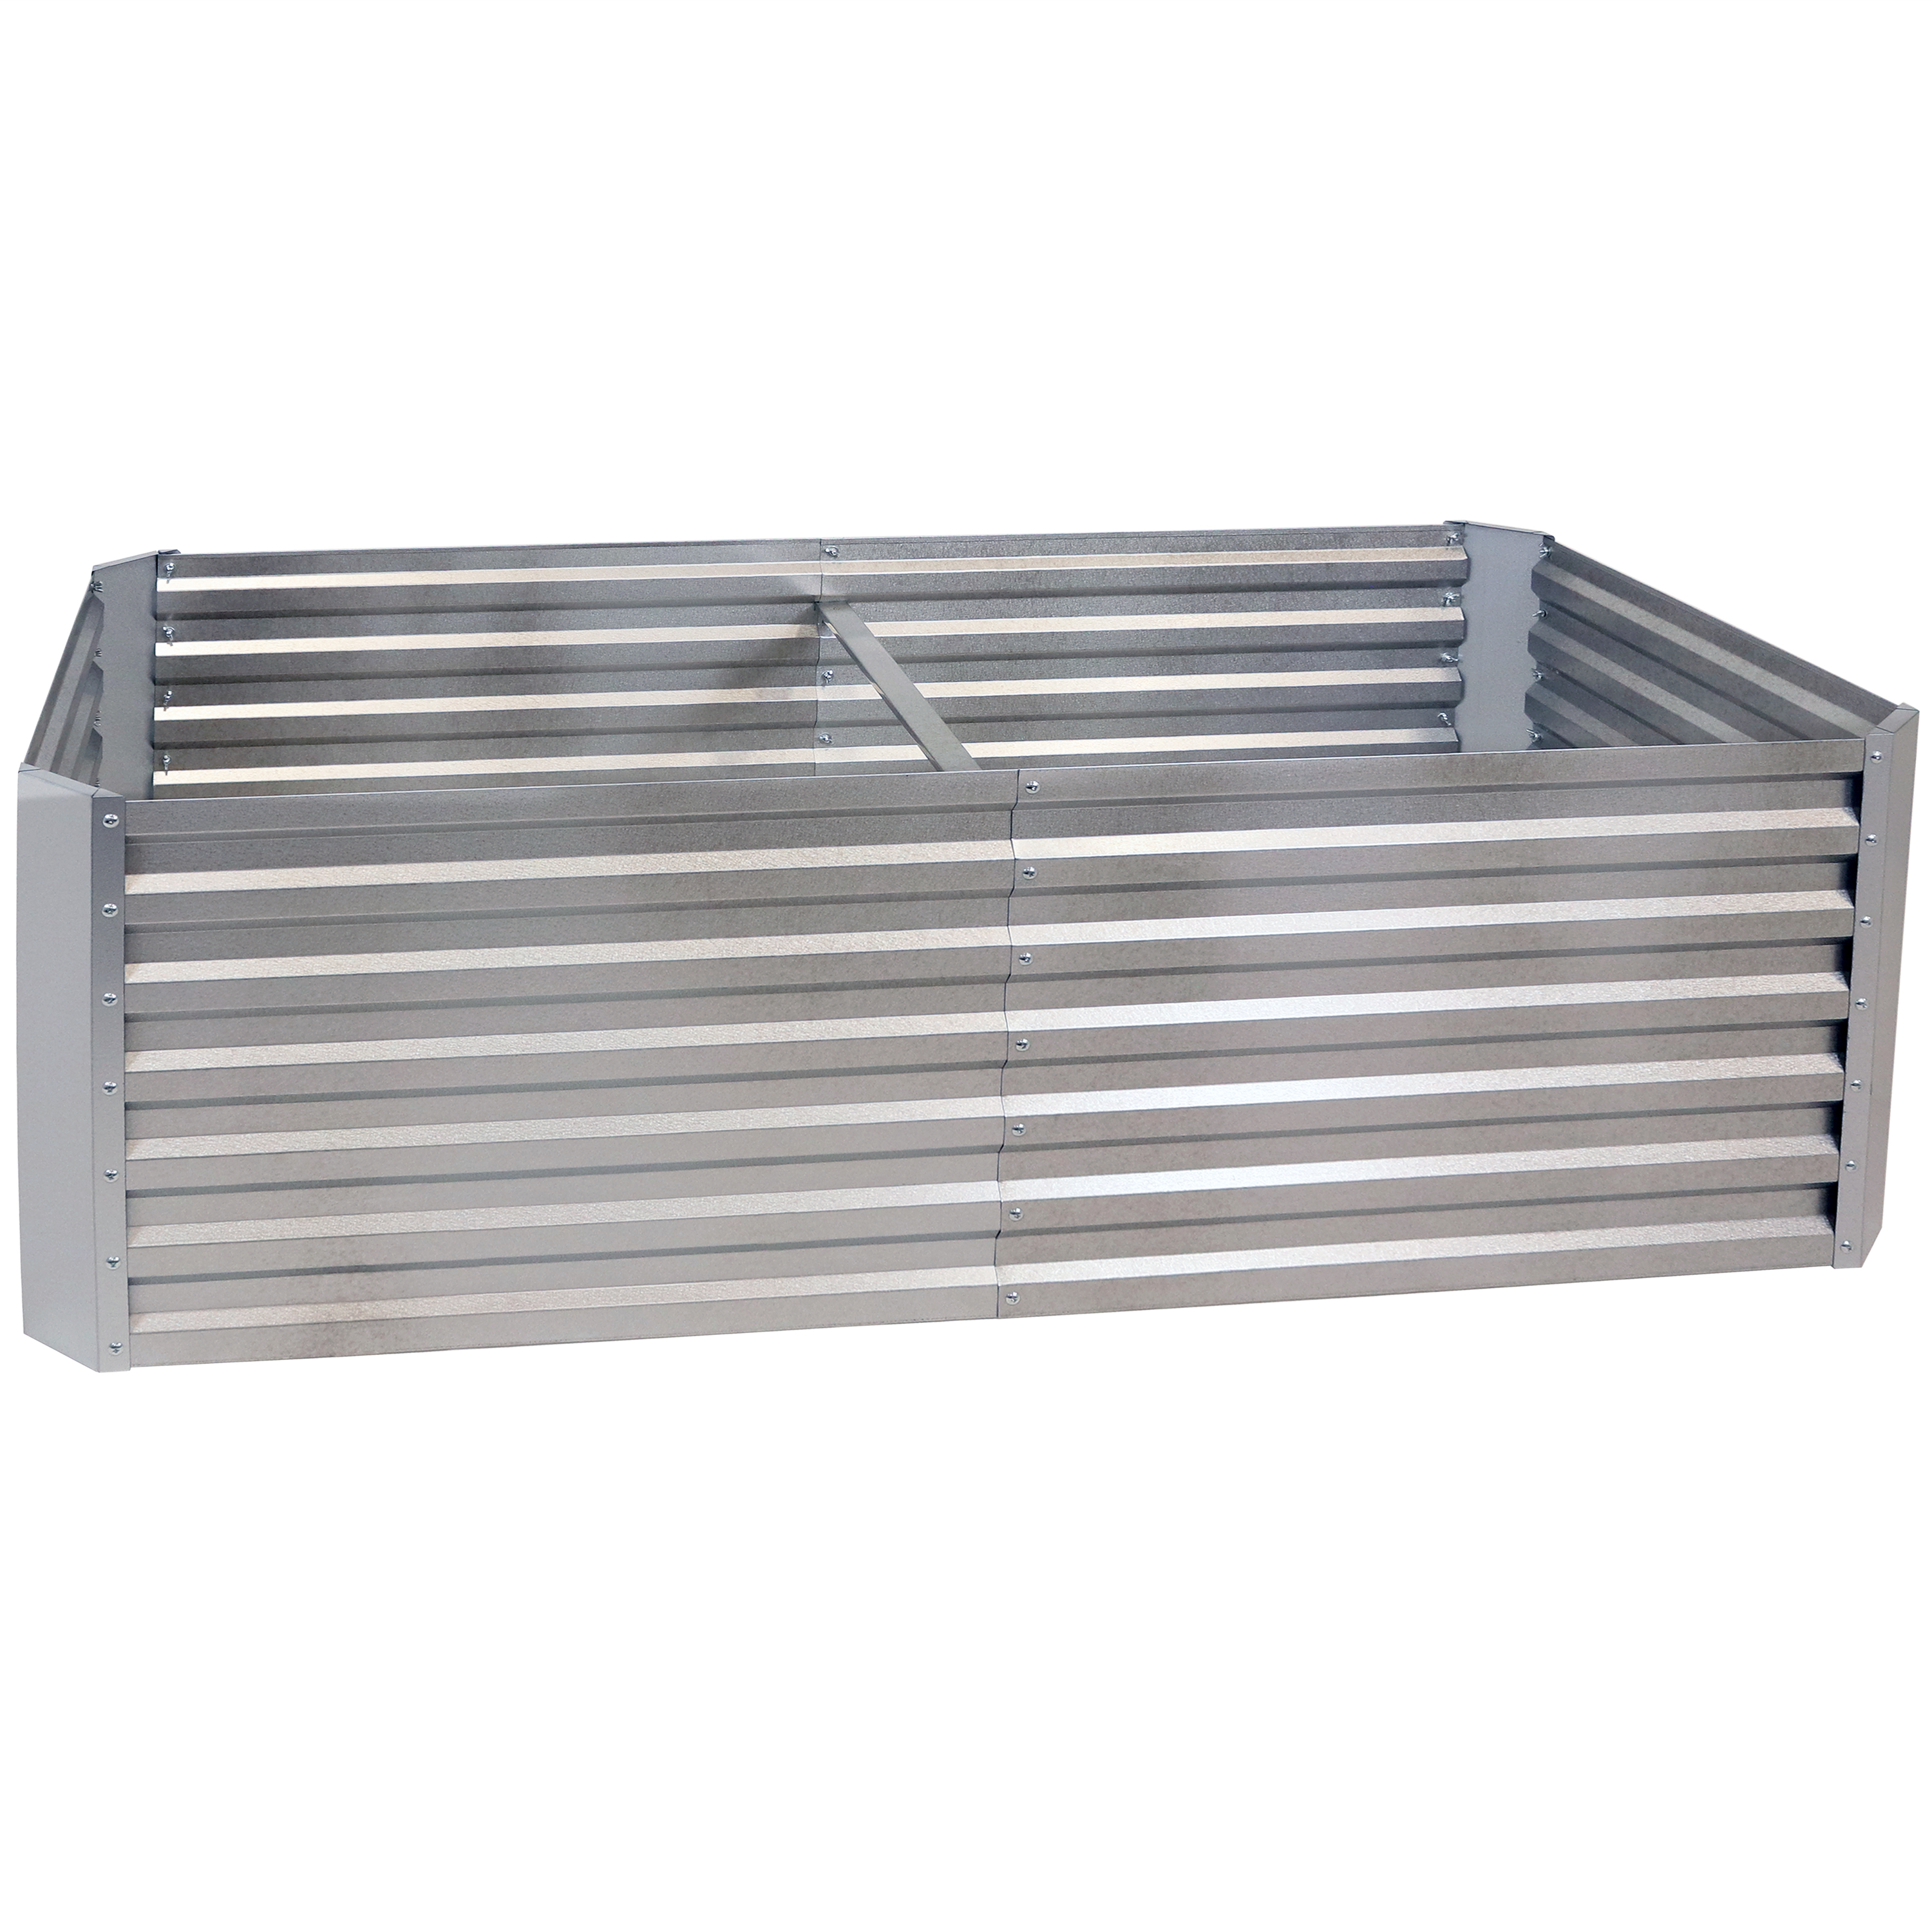 Galvalume Steel Rectangle Raised Garden Bed - Silver - 71 in